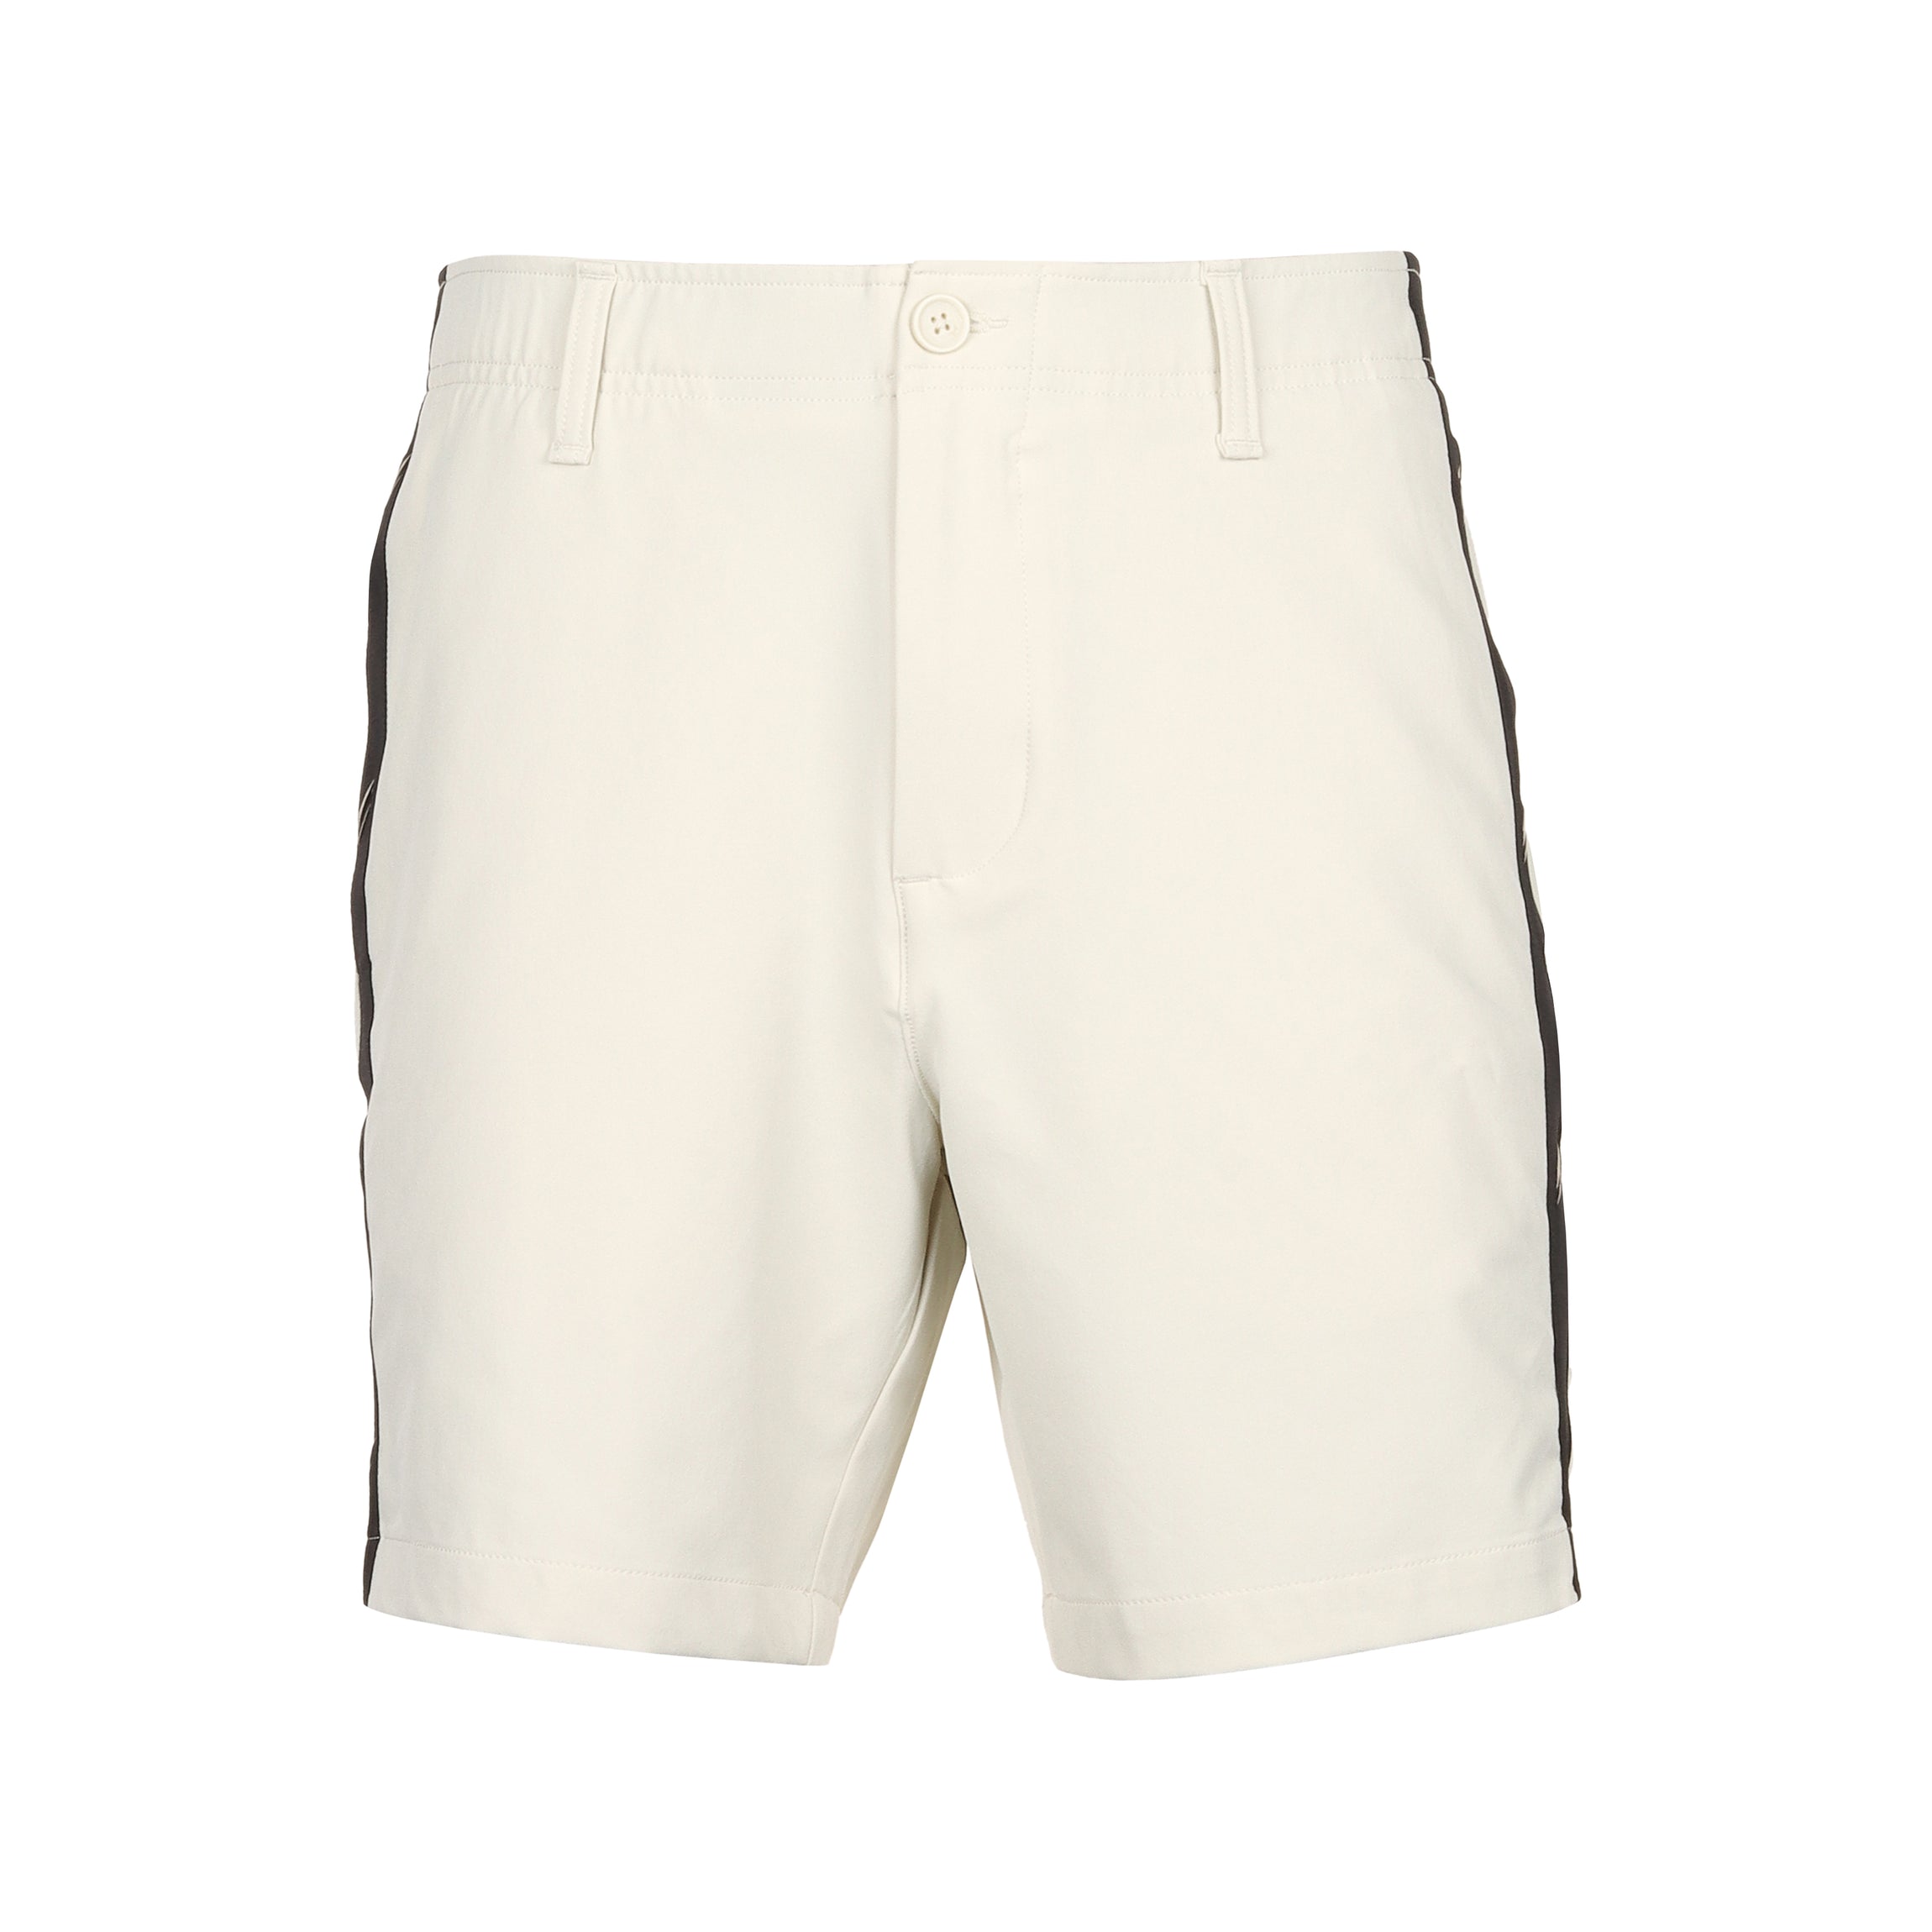 Under Armour Drive Golf Shorts - White